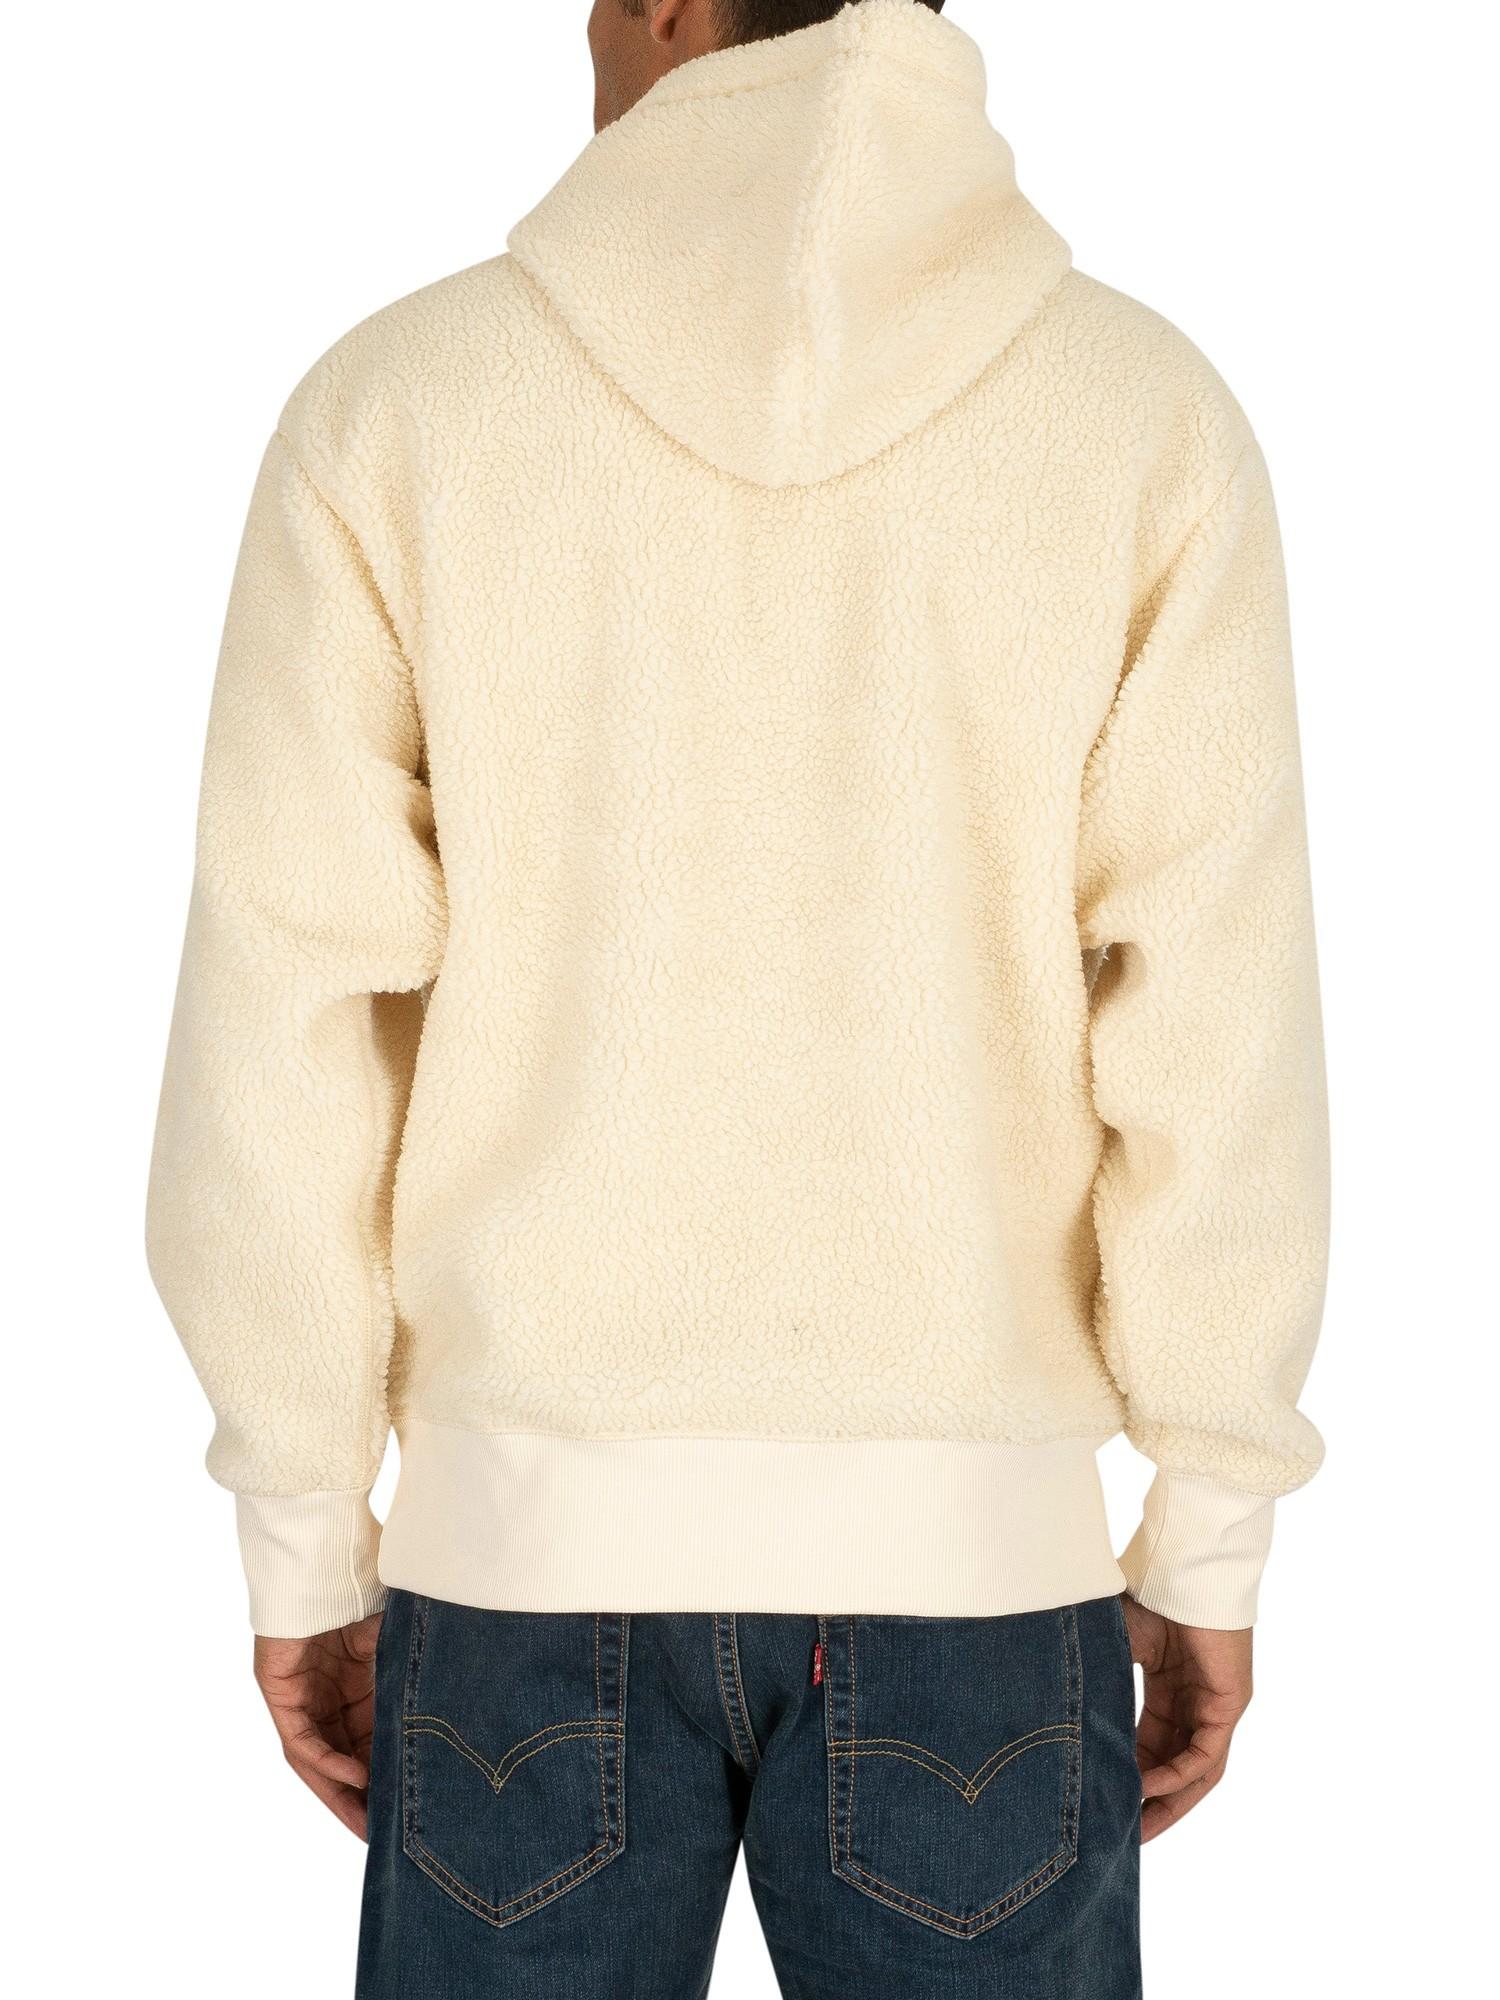 Timberland Sherpa Fleece Hoodie in White for Men - Lyst